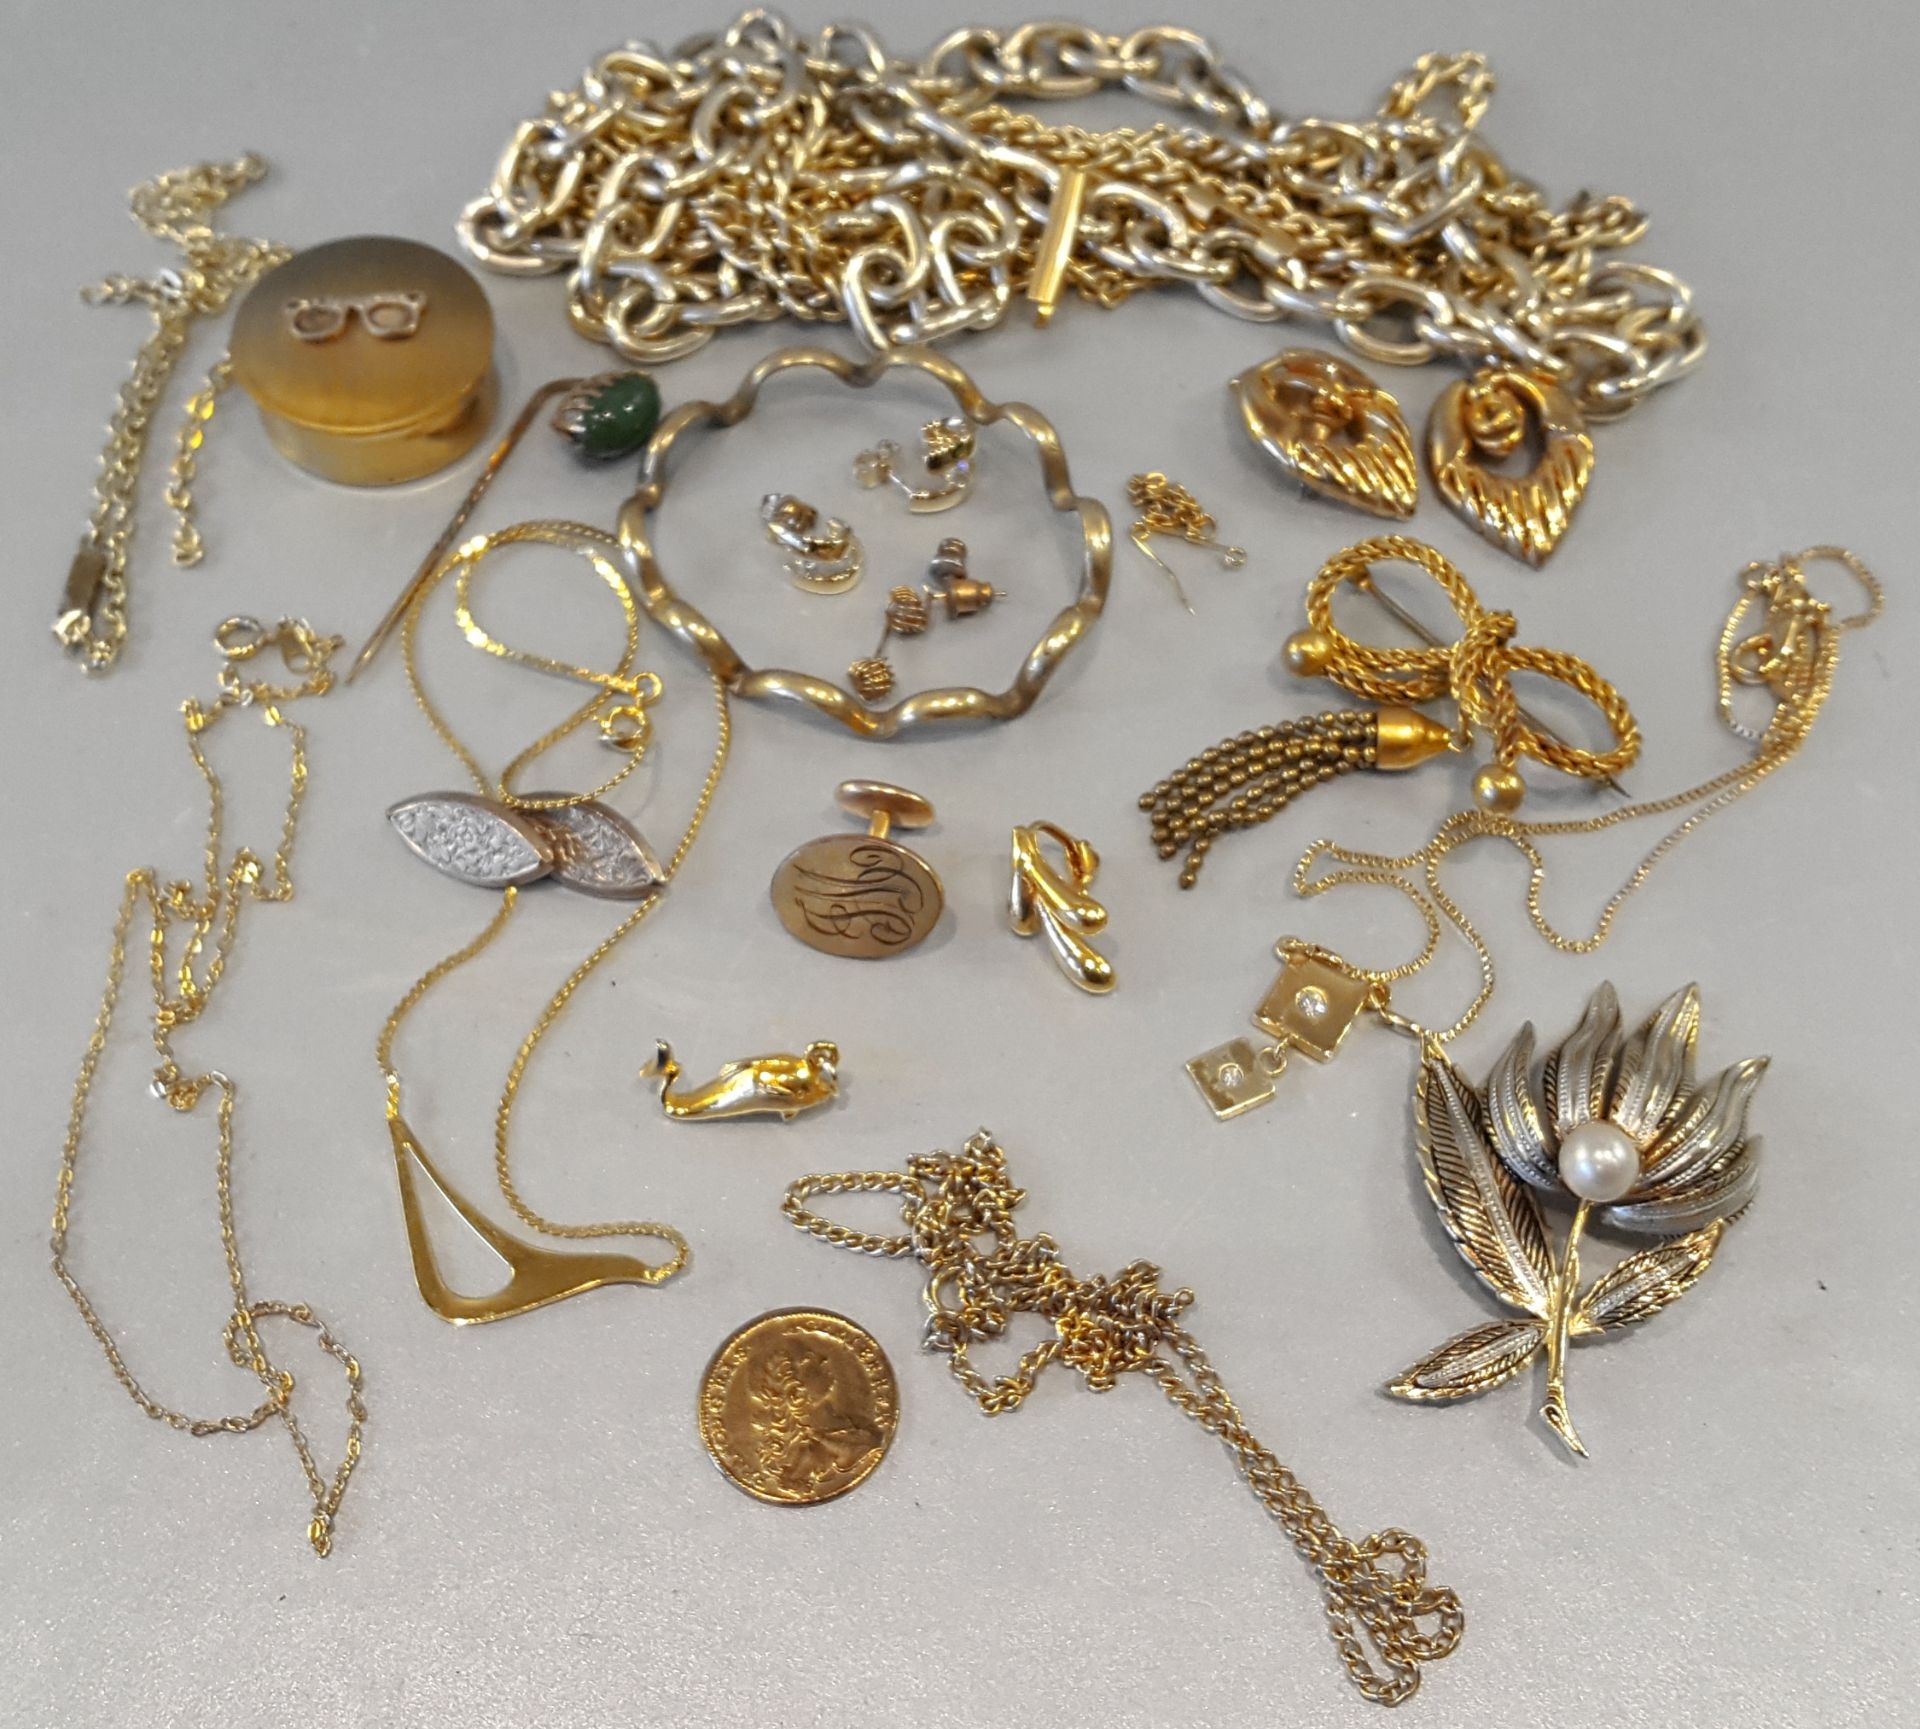 Vintage Retro Parcel of Jewellery Incldes Coin, Chains, Earrings Brooches.